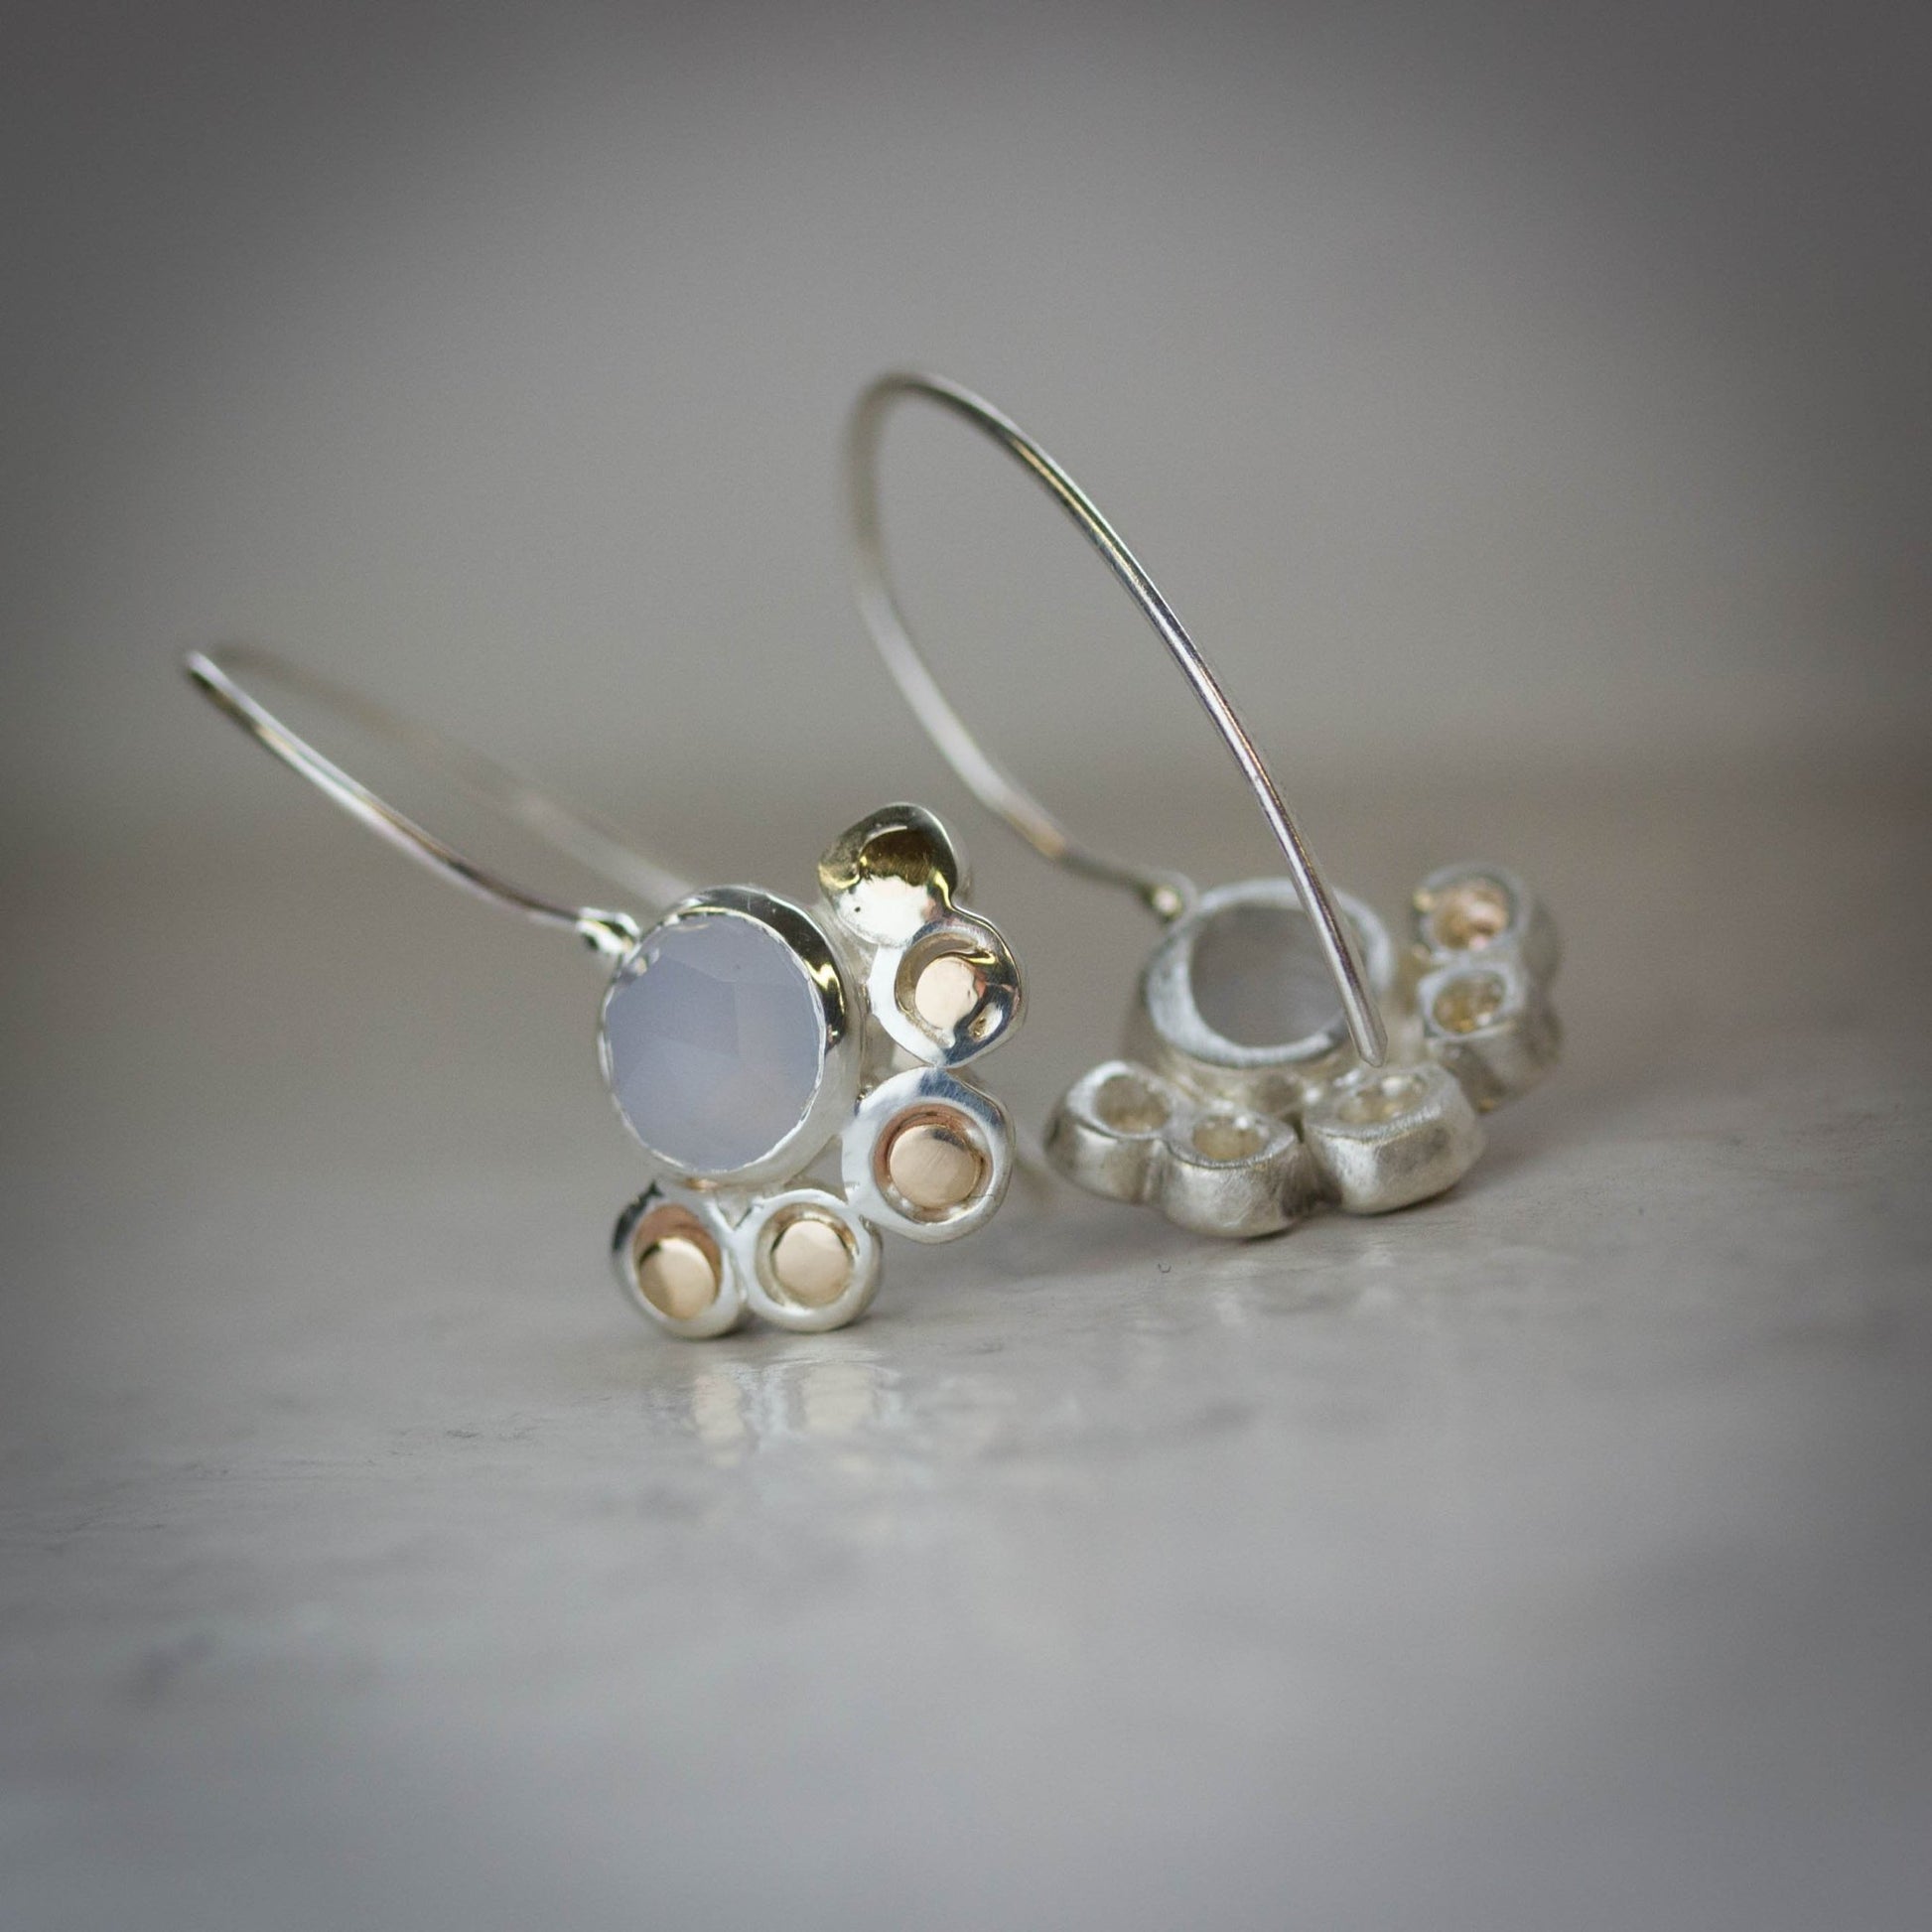 Chalcendony Earrings in Mixed Metals - Madelynn Cassin Designs